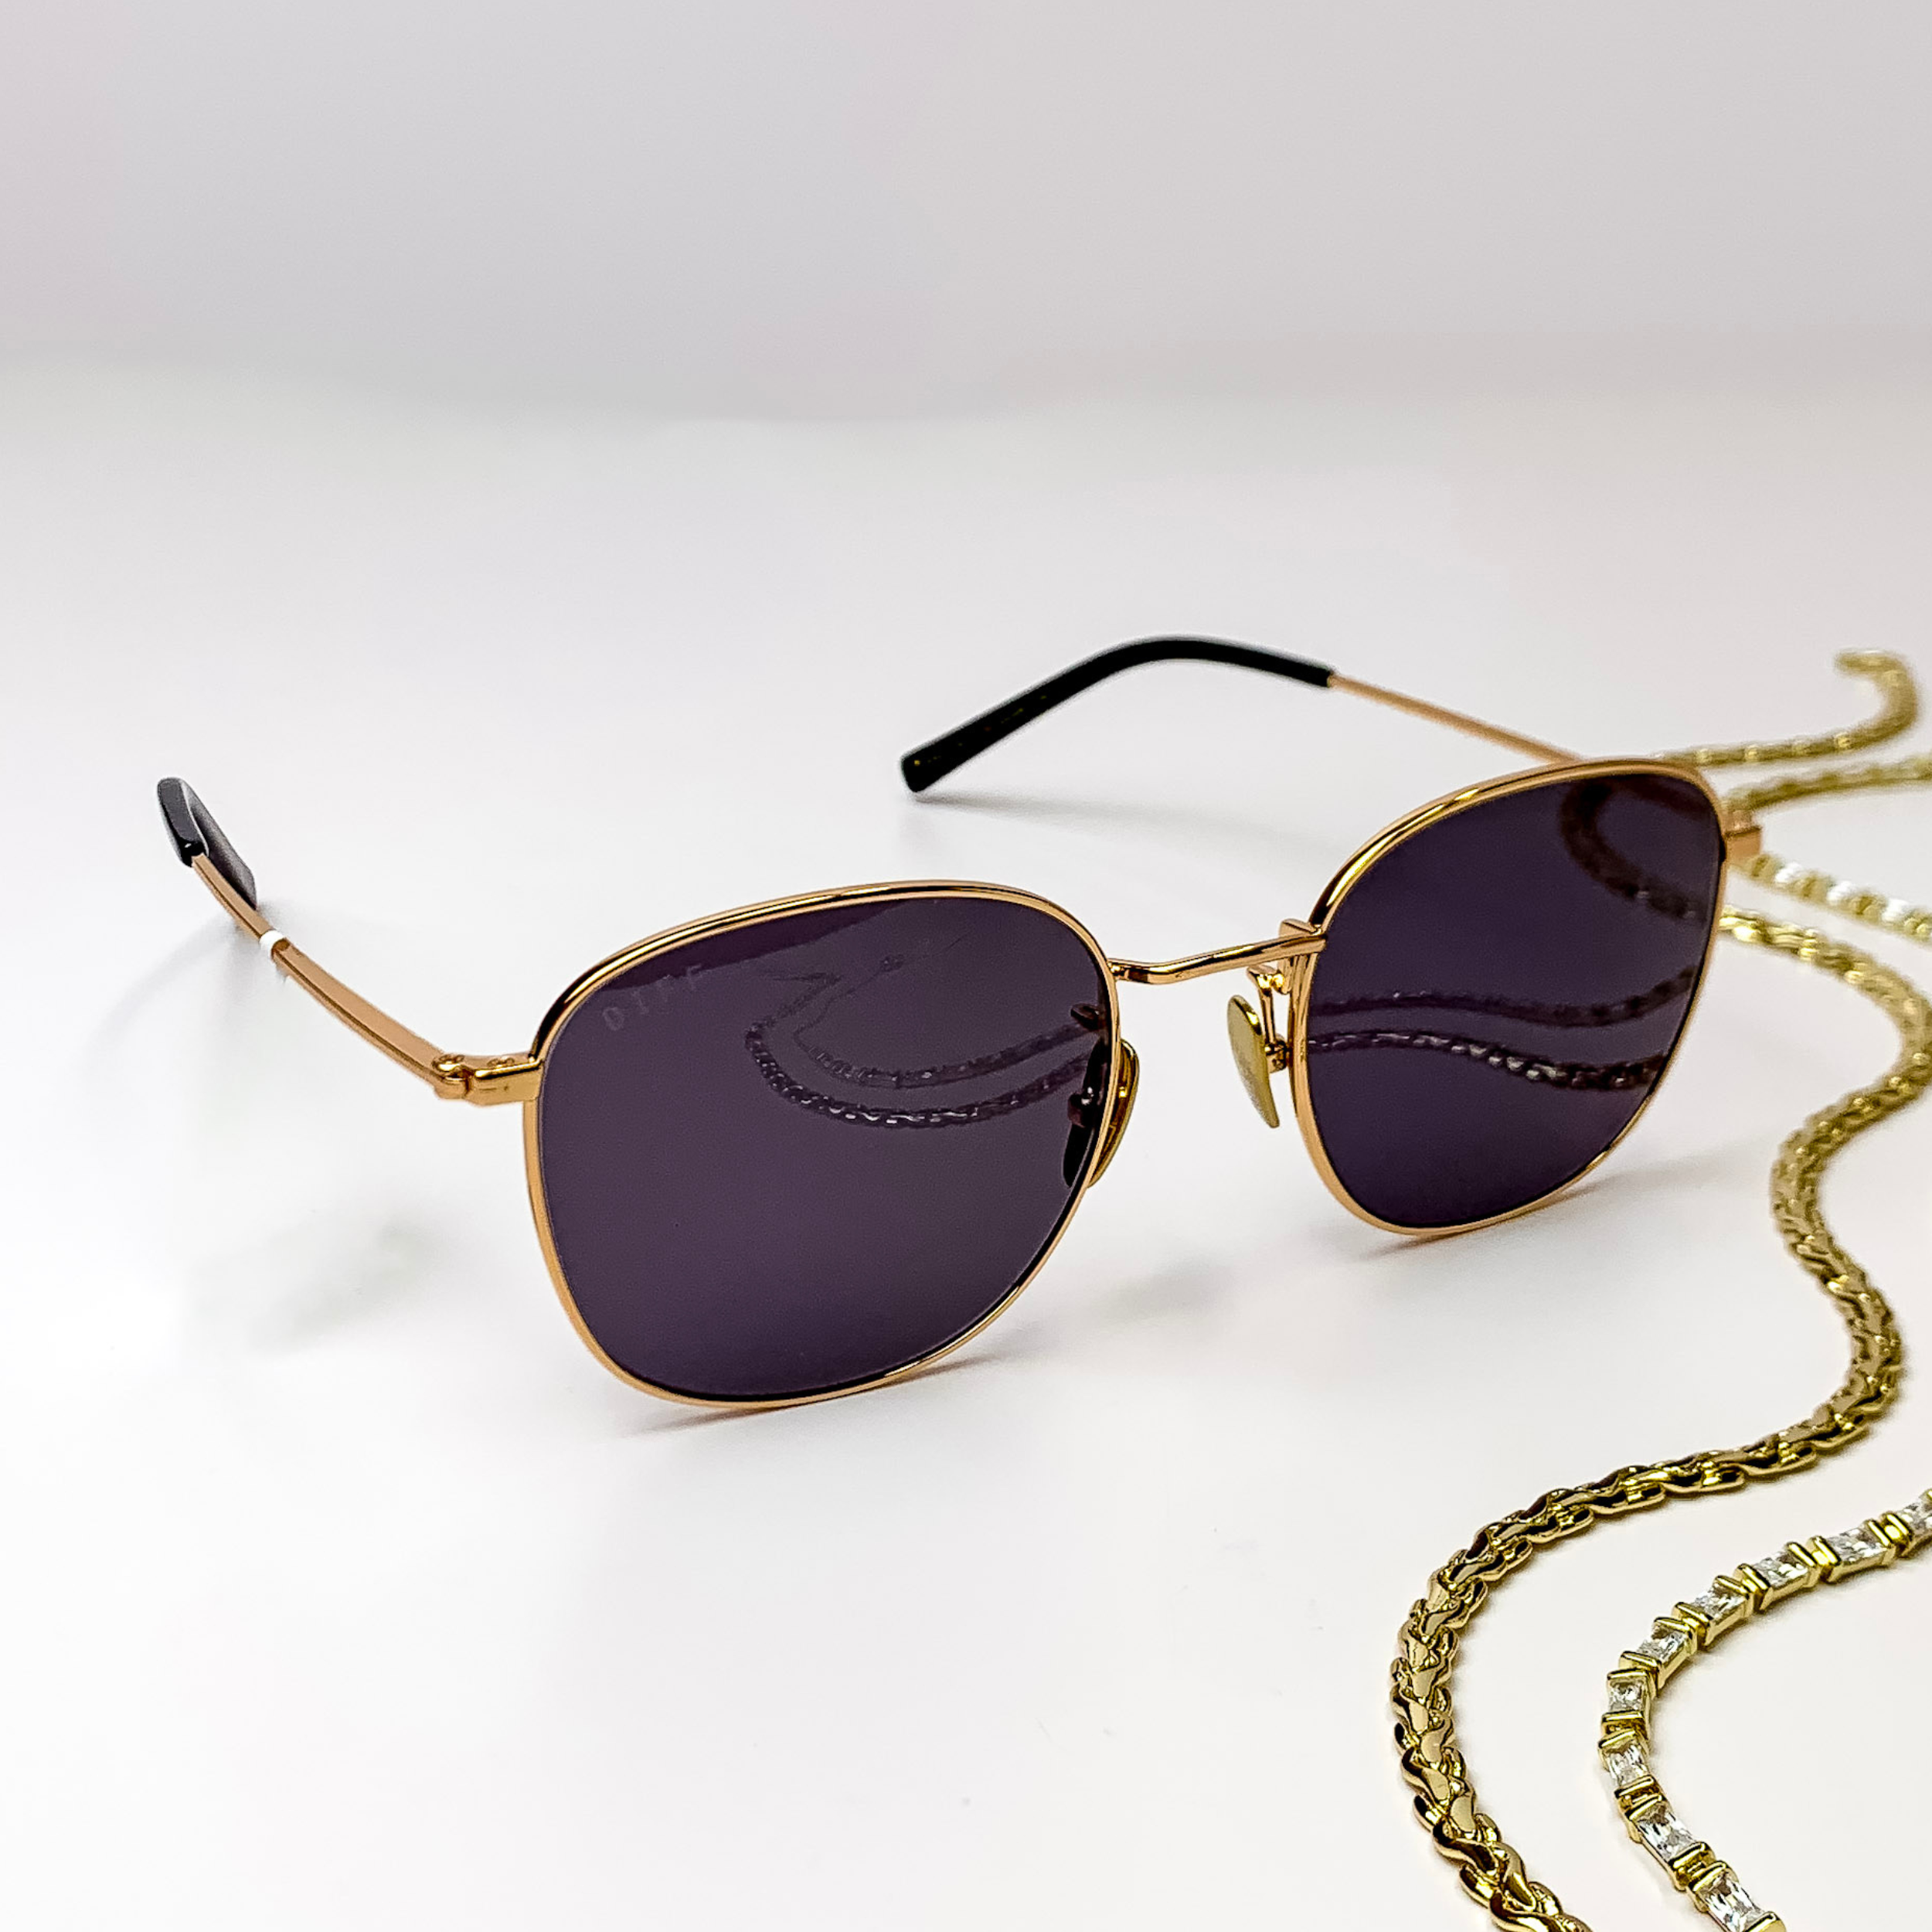 Square gold sunglasses with a thin frame, black ear tips, and grey lenses.